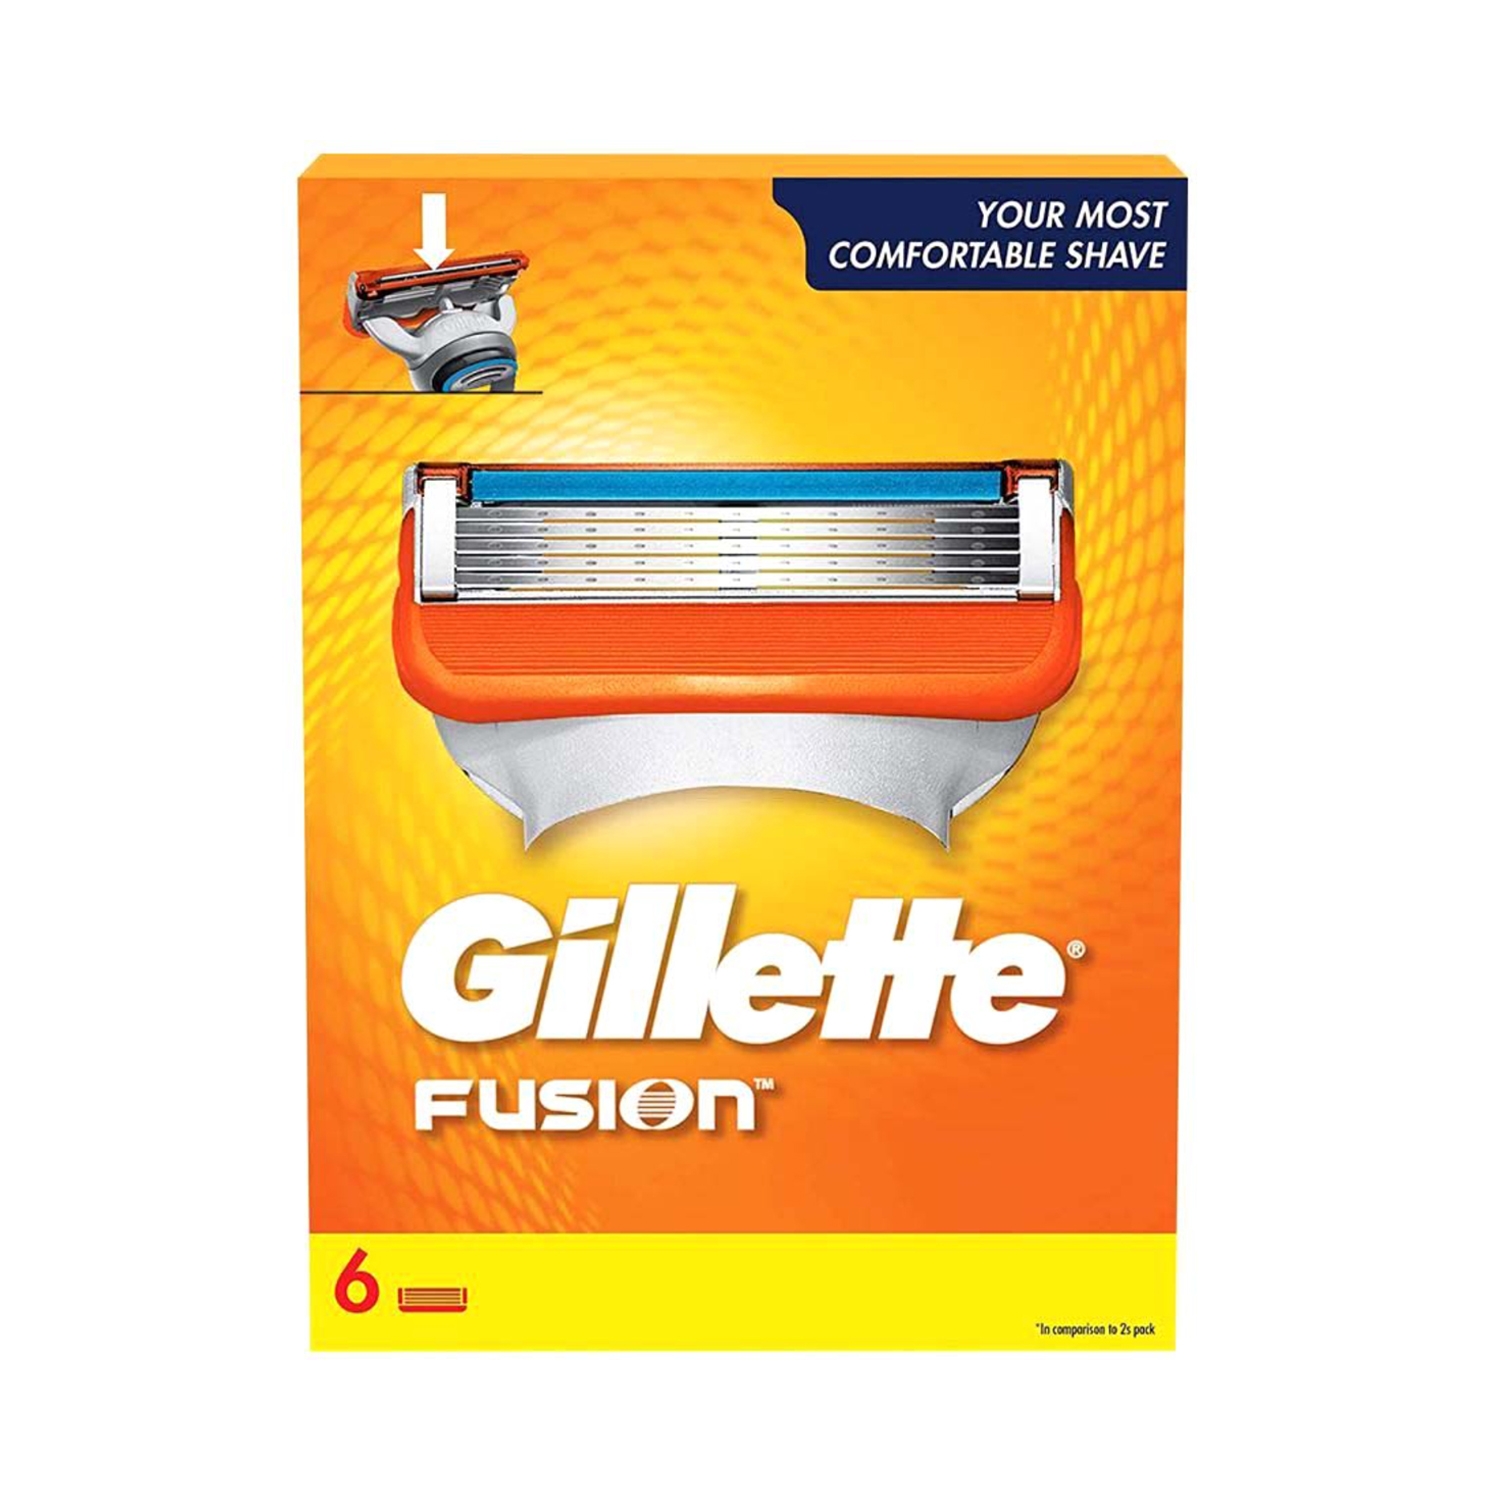 Gillette | Gillette Fusion Manual Blades for Perfect Shave and Perfect Beard Shape with Styling Back Blade (6Pcs)